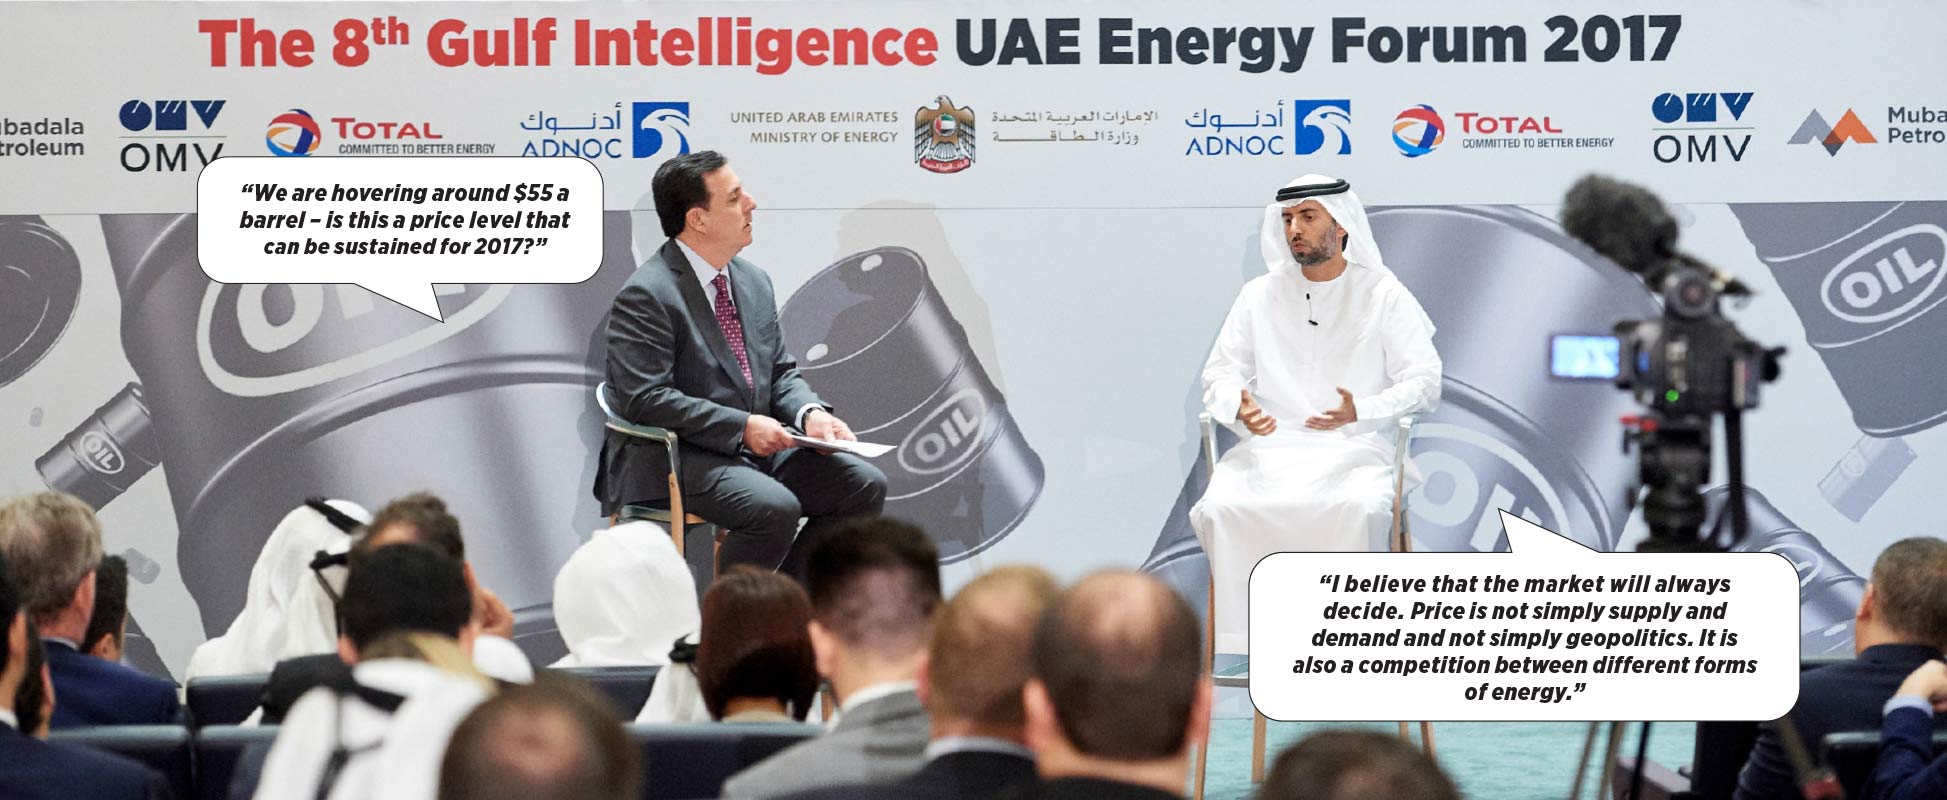 Exclusive Interview: H.E. Suhail Al-Mazrouei, Minister of Energy, UAE